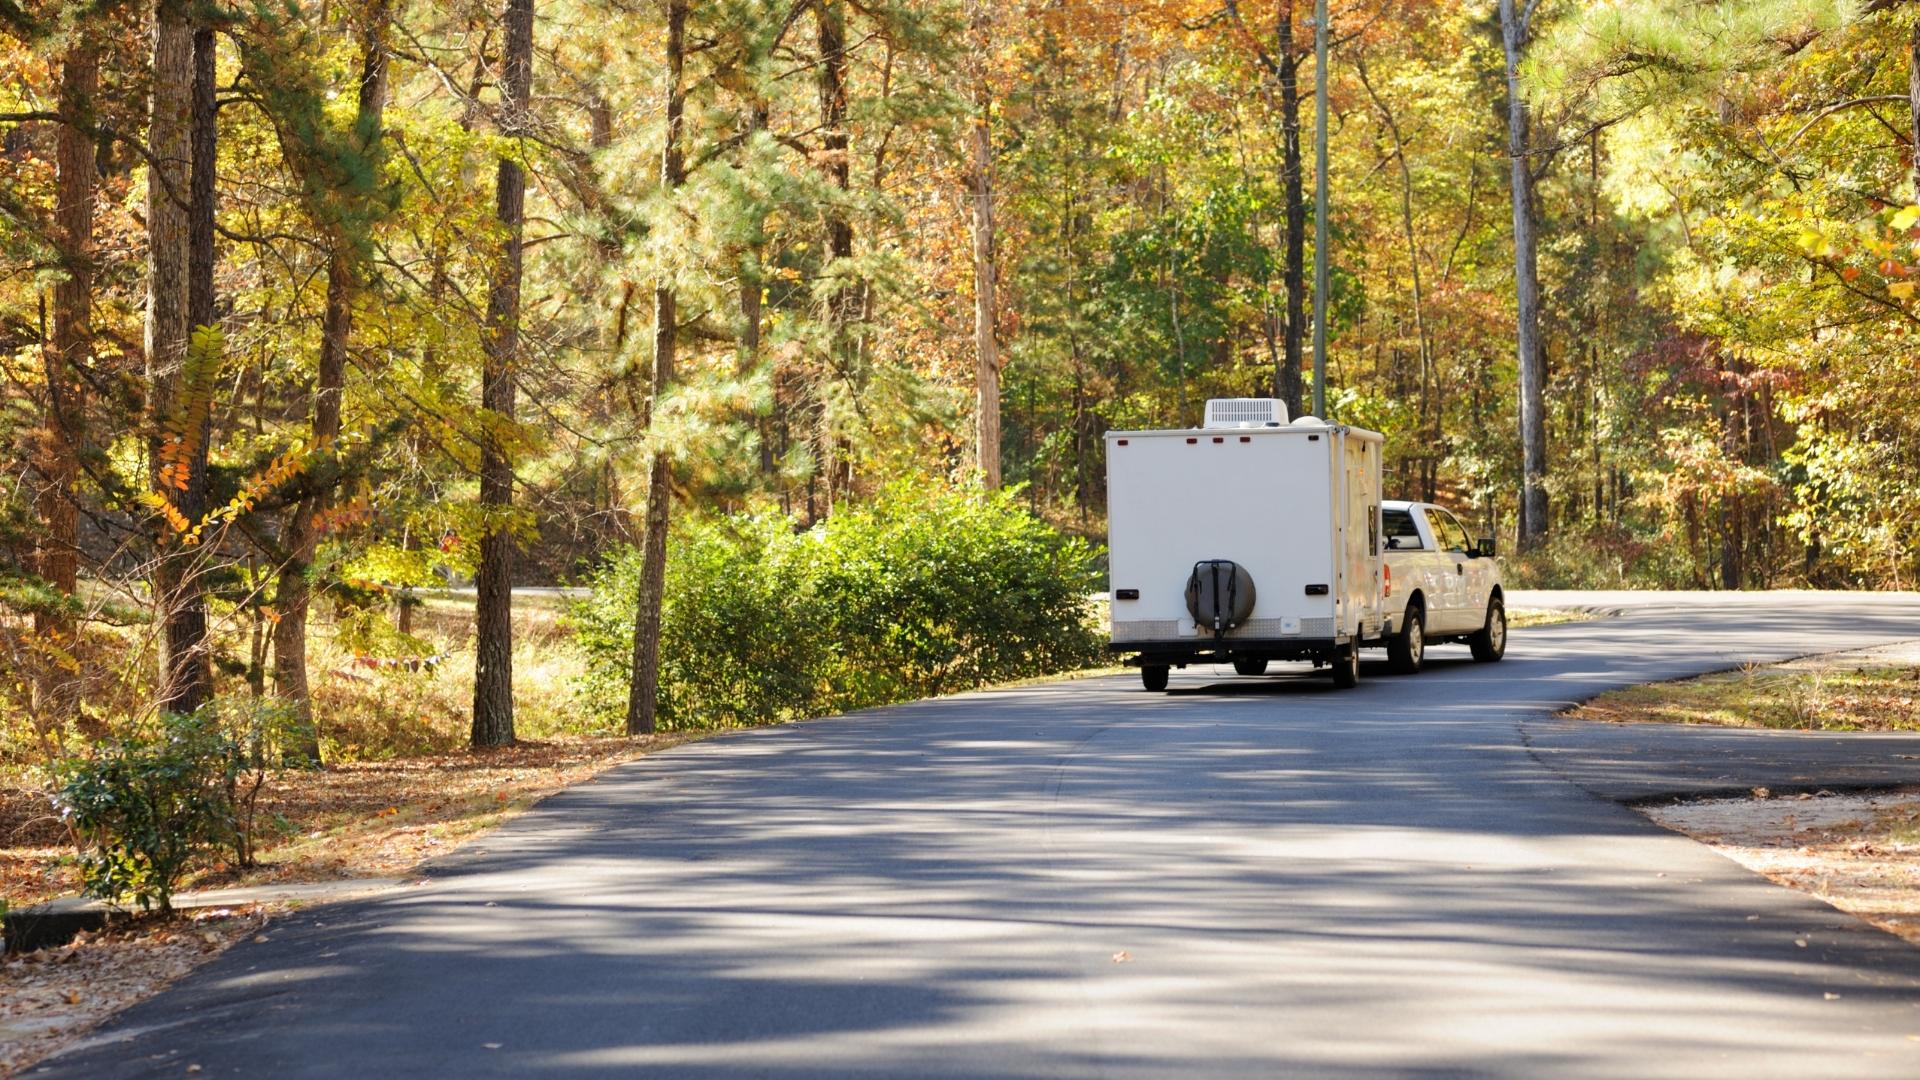 When experiencing trailer sway, you can take steps to control it.